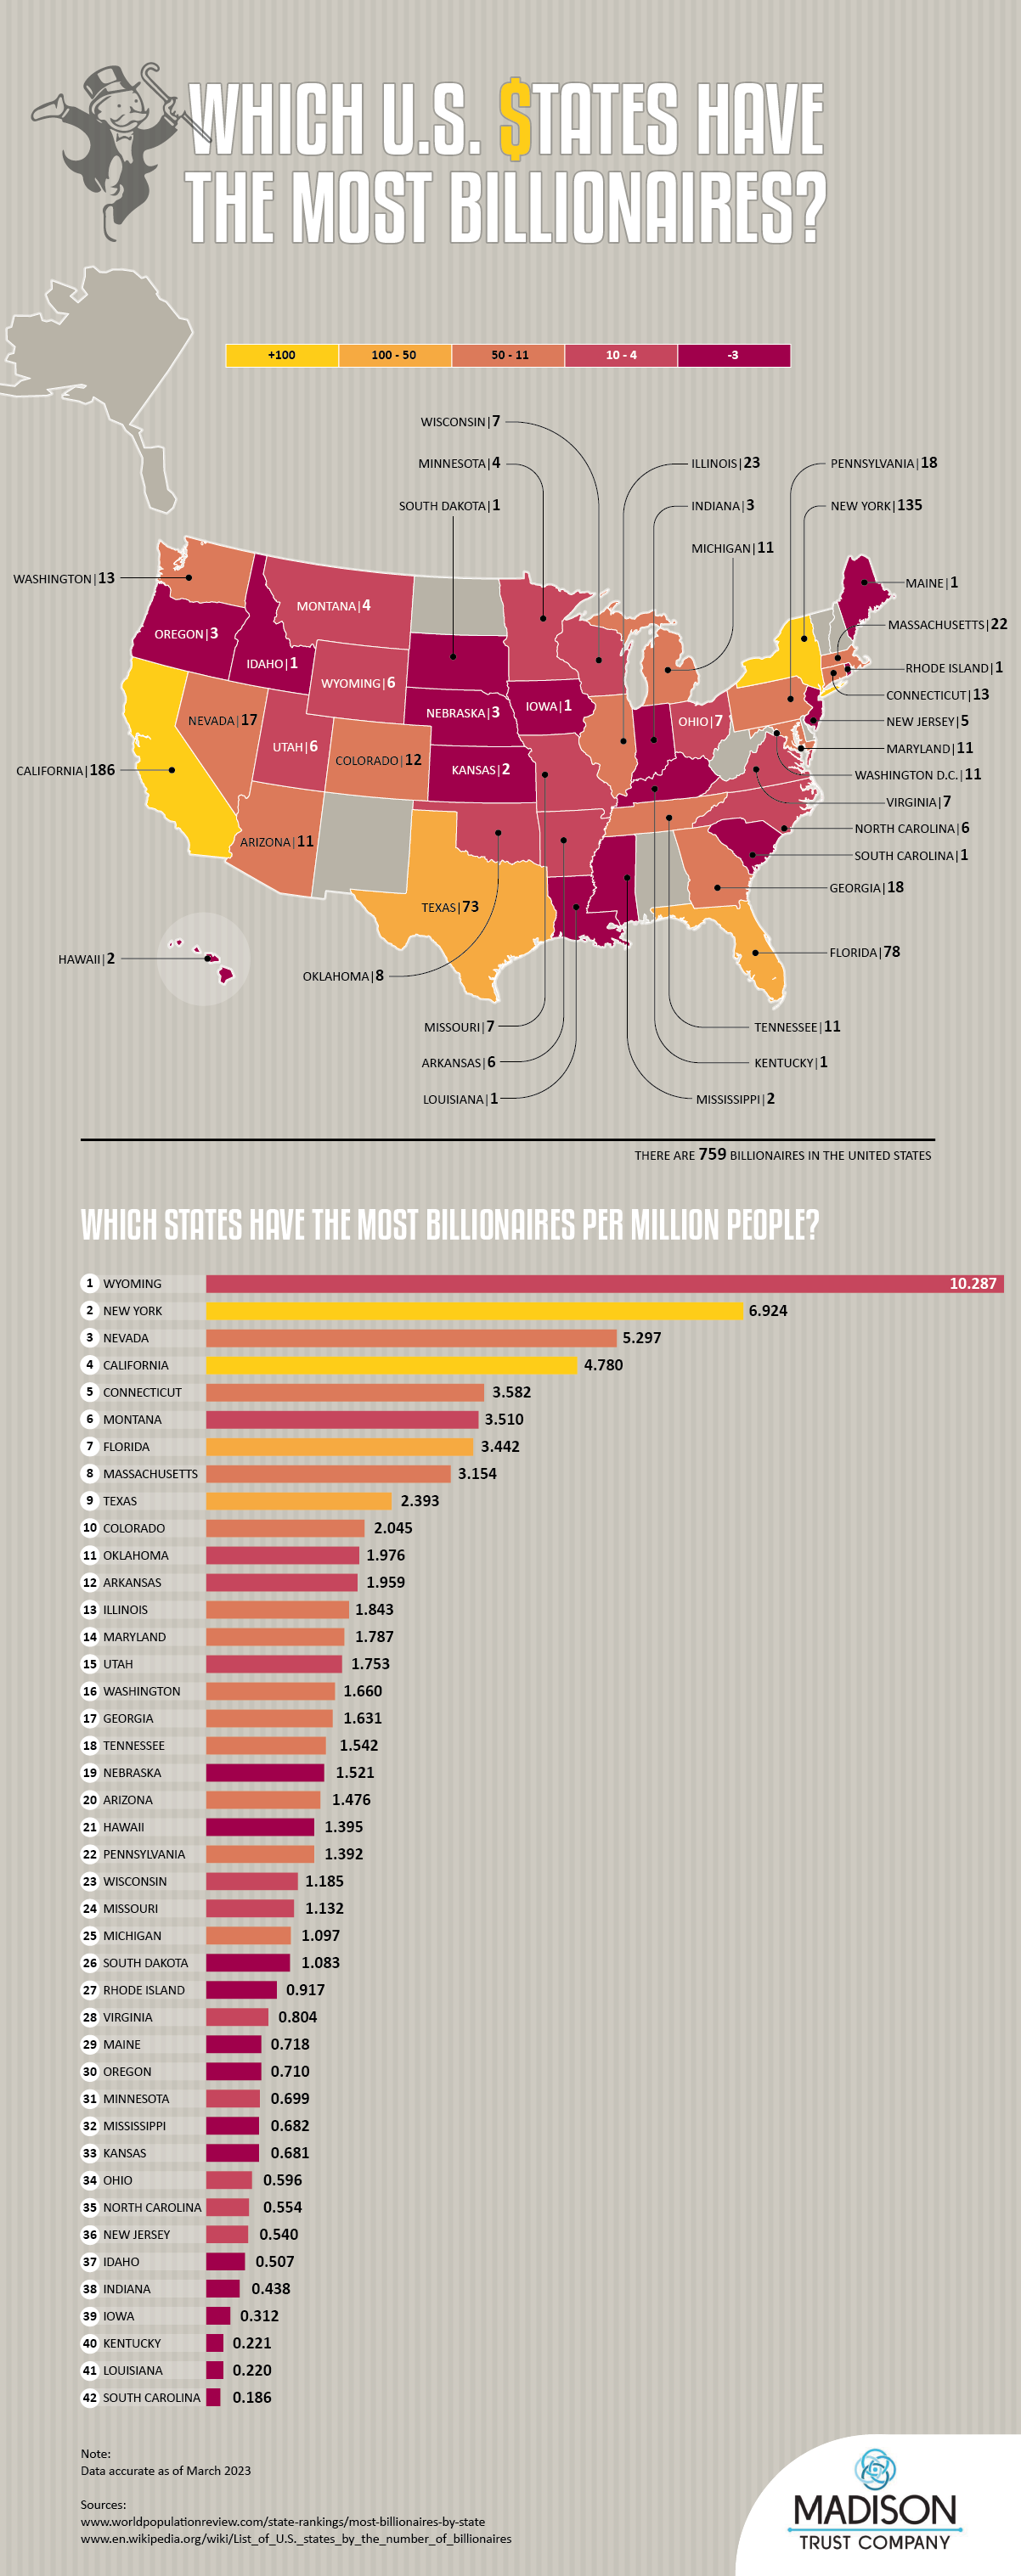 Which U.S. States Have the Most Billionaires? - MadisonTrust.com IRA - Infographic